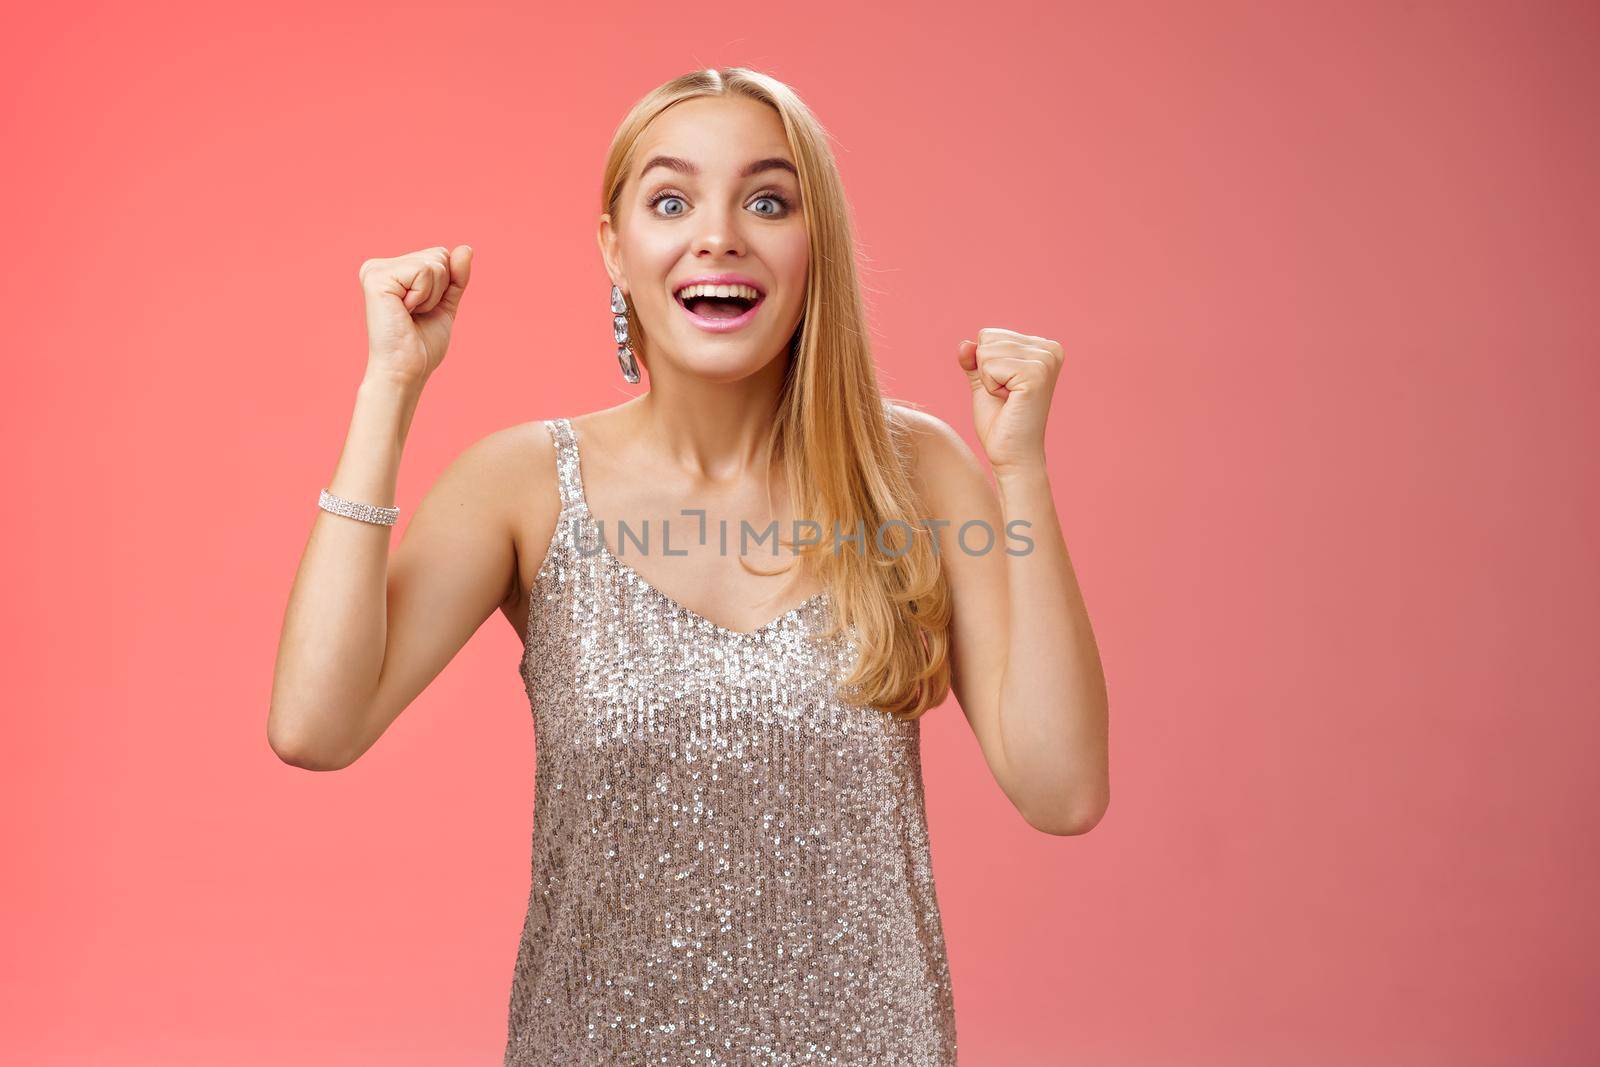 Lifestyle. Surprised happy celebrating blond young woman in silver trendy dress raising hands up yes victory gesture smiling broadly excited winning first place reach goal grinning thrilled triumphing.